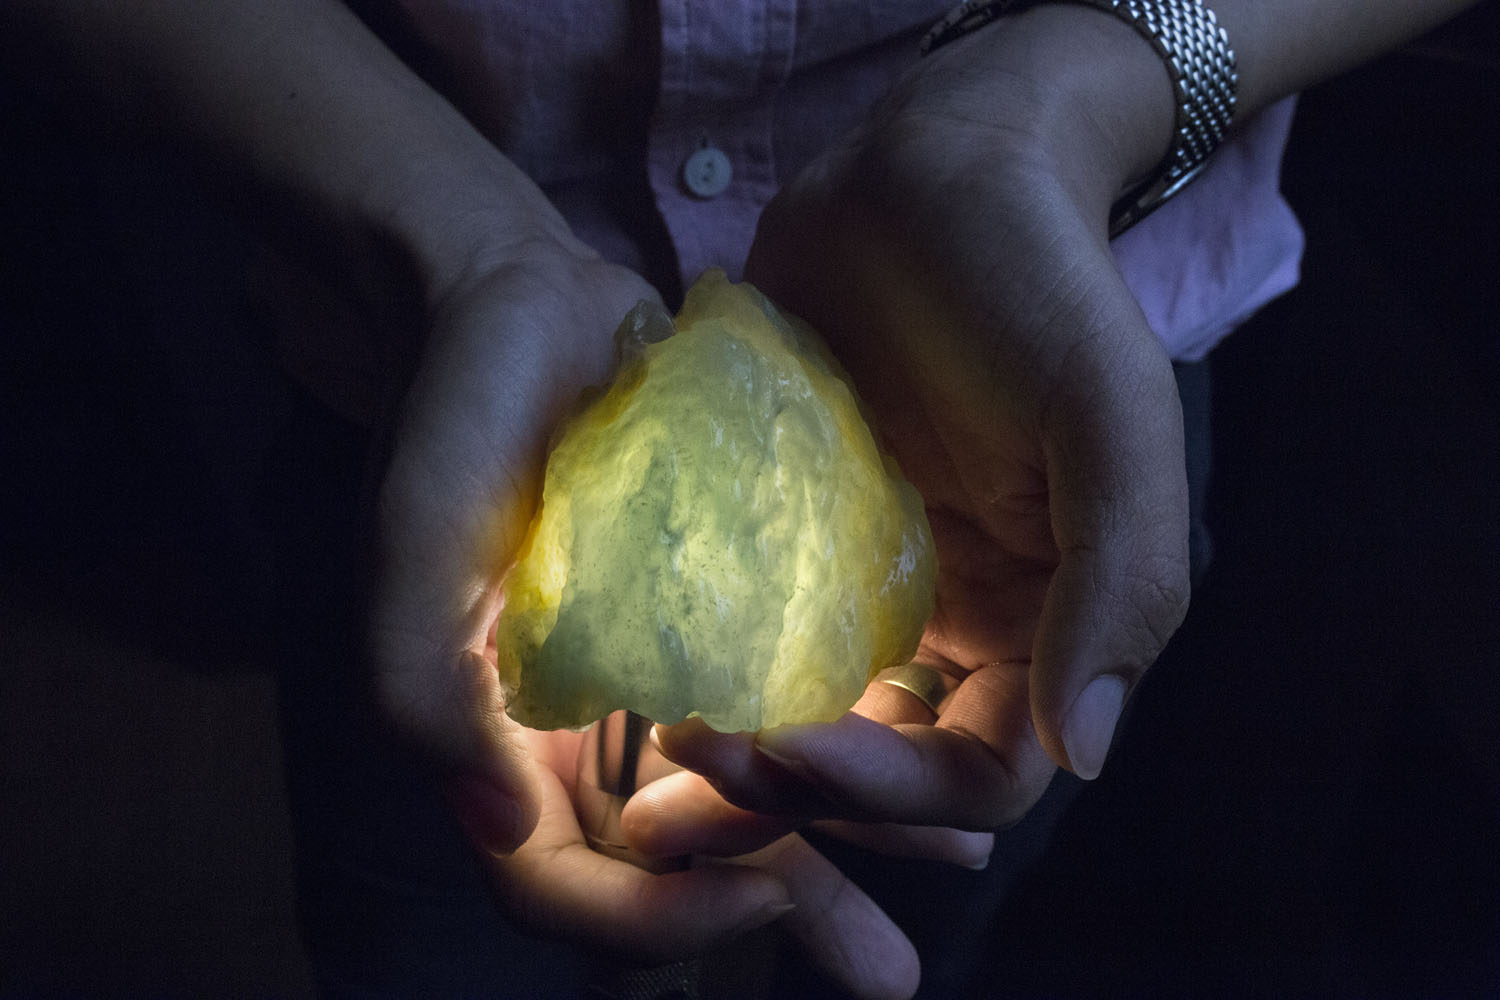 A trader shows a jade stone which he estimates to be worth at least forty or fifty thousands U.S. Dollars in price in the black market, at a hotel room in Yin Jiang, China, June 17, 2015. According to the Myanmar jade traders of the black market, almost all the raw jade stones which are being traded in Yin Jiang are smuggled directly from the black market in Myanmar's land of jade in Kachin state where the billion-dollar industry is based in.Credit : Minzayar - NRGI